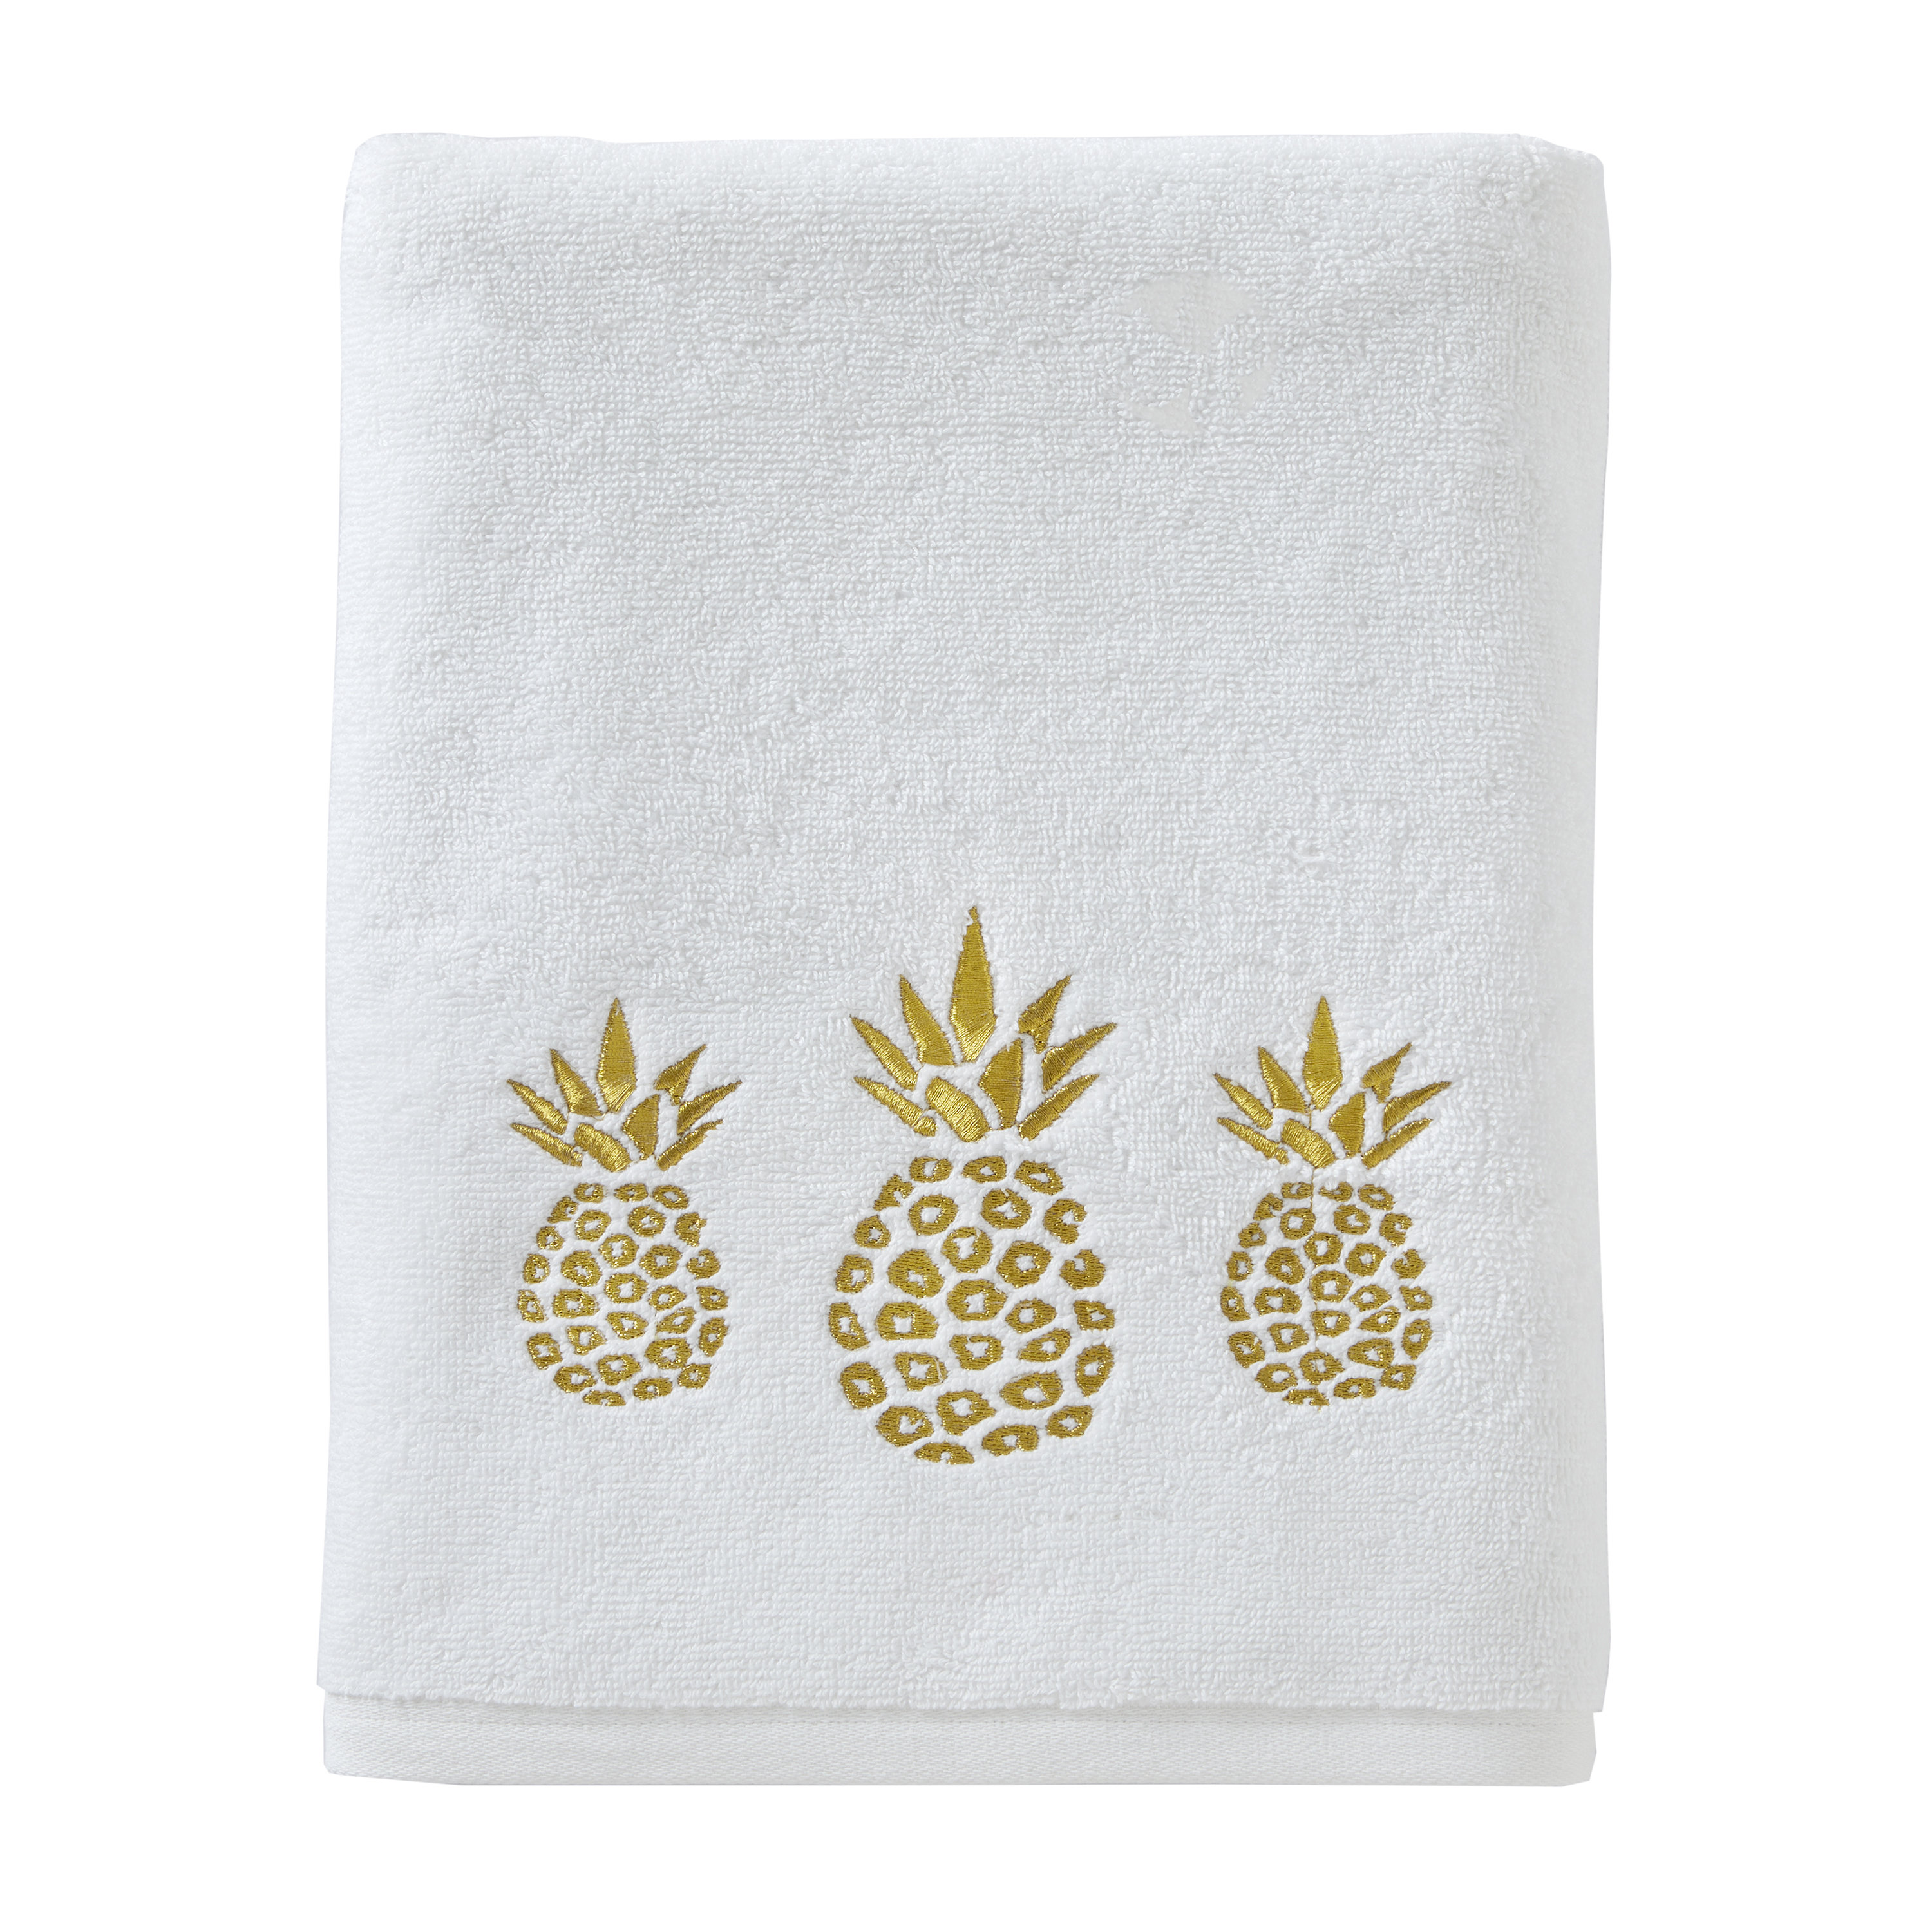 Luxury Embroidery Towels Pure cotton water absorption antibacterial bath towel 